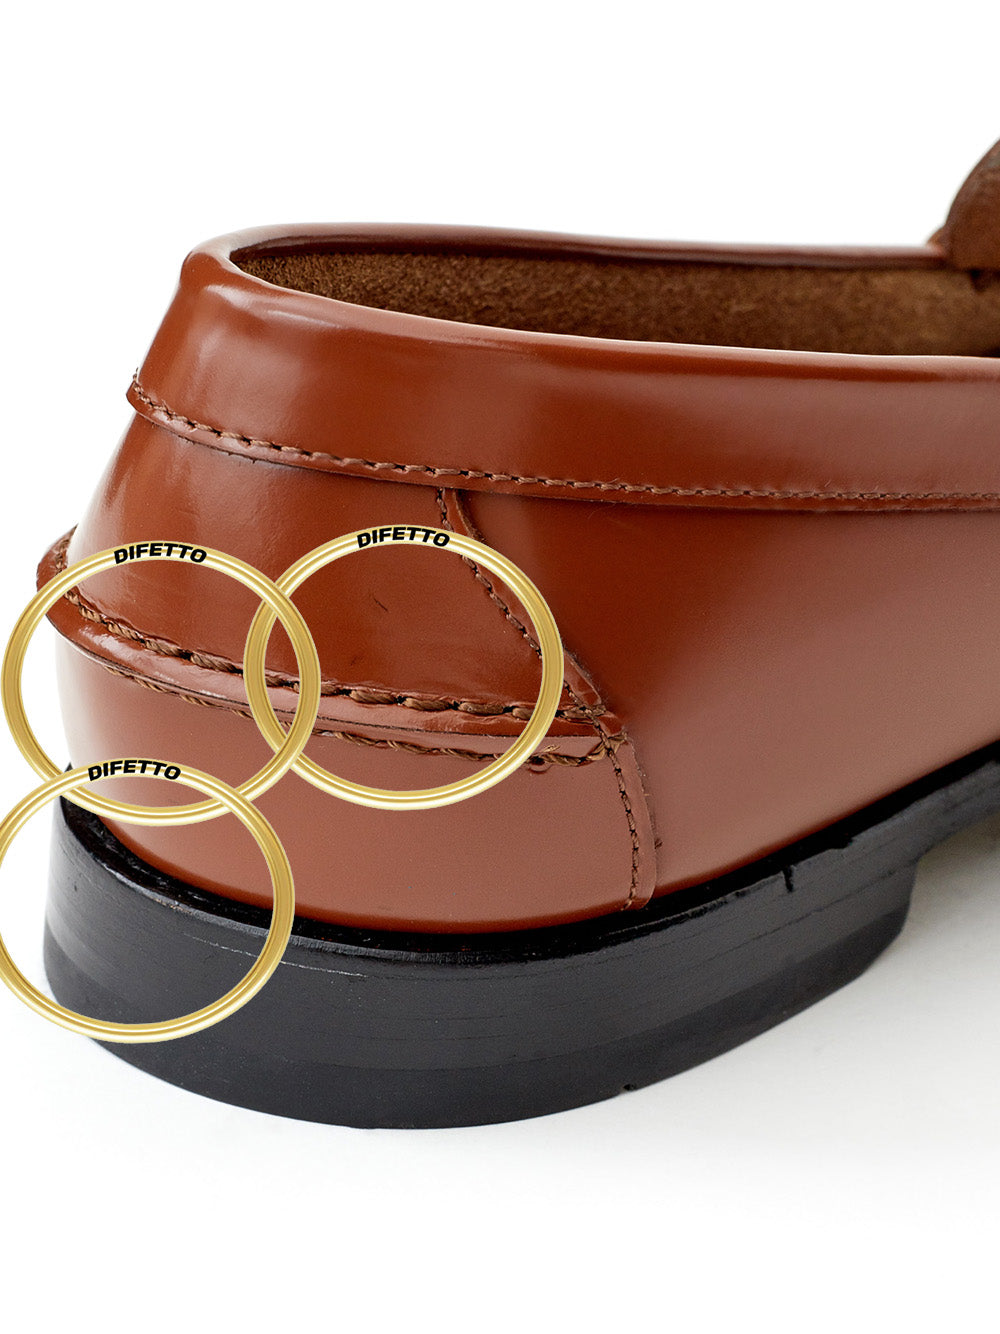 Prada Moccasin in Brown Leather